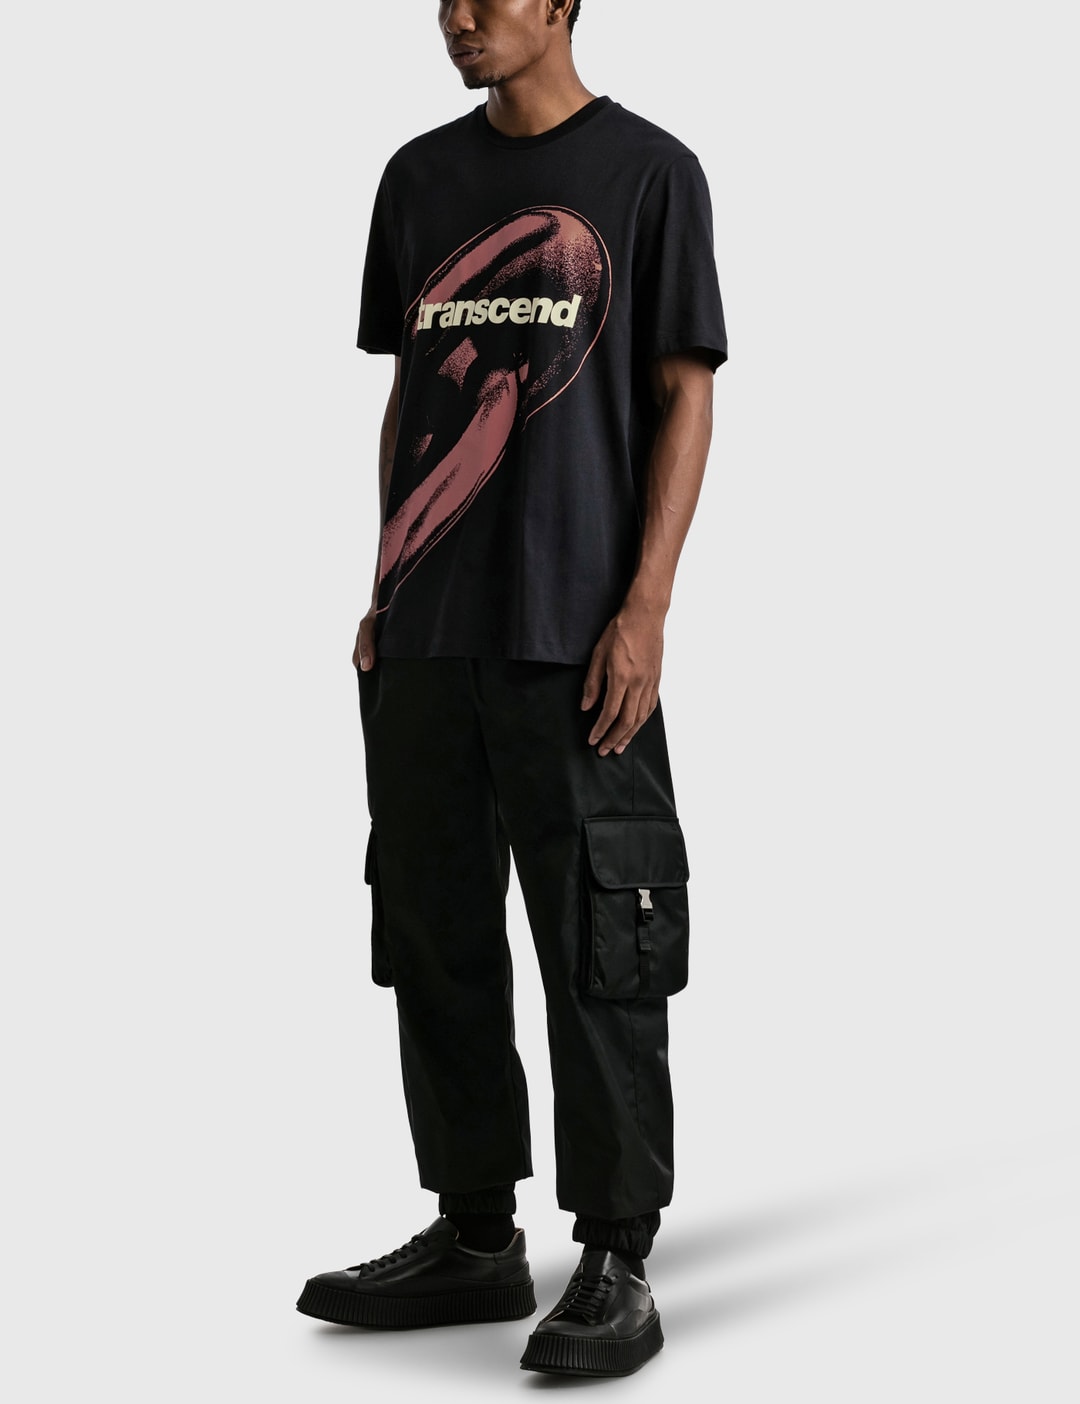 OAMC - Transcend T-shirt | HBX - Globally Curated Fashion and Lifestyle ...